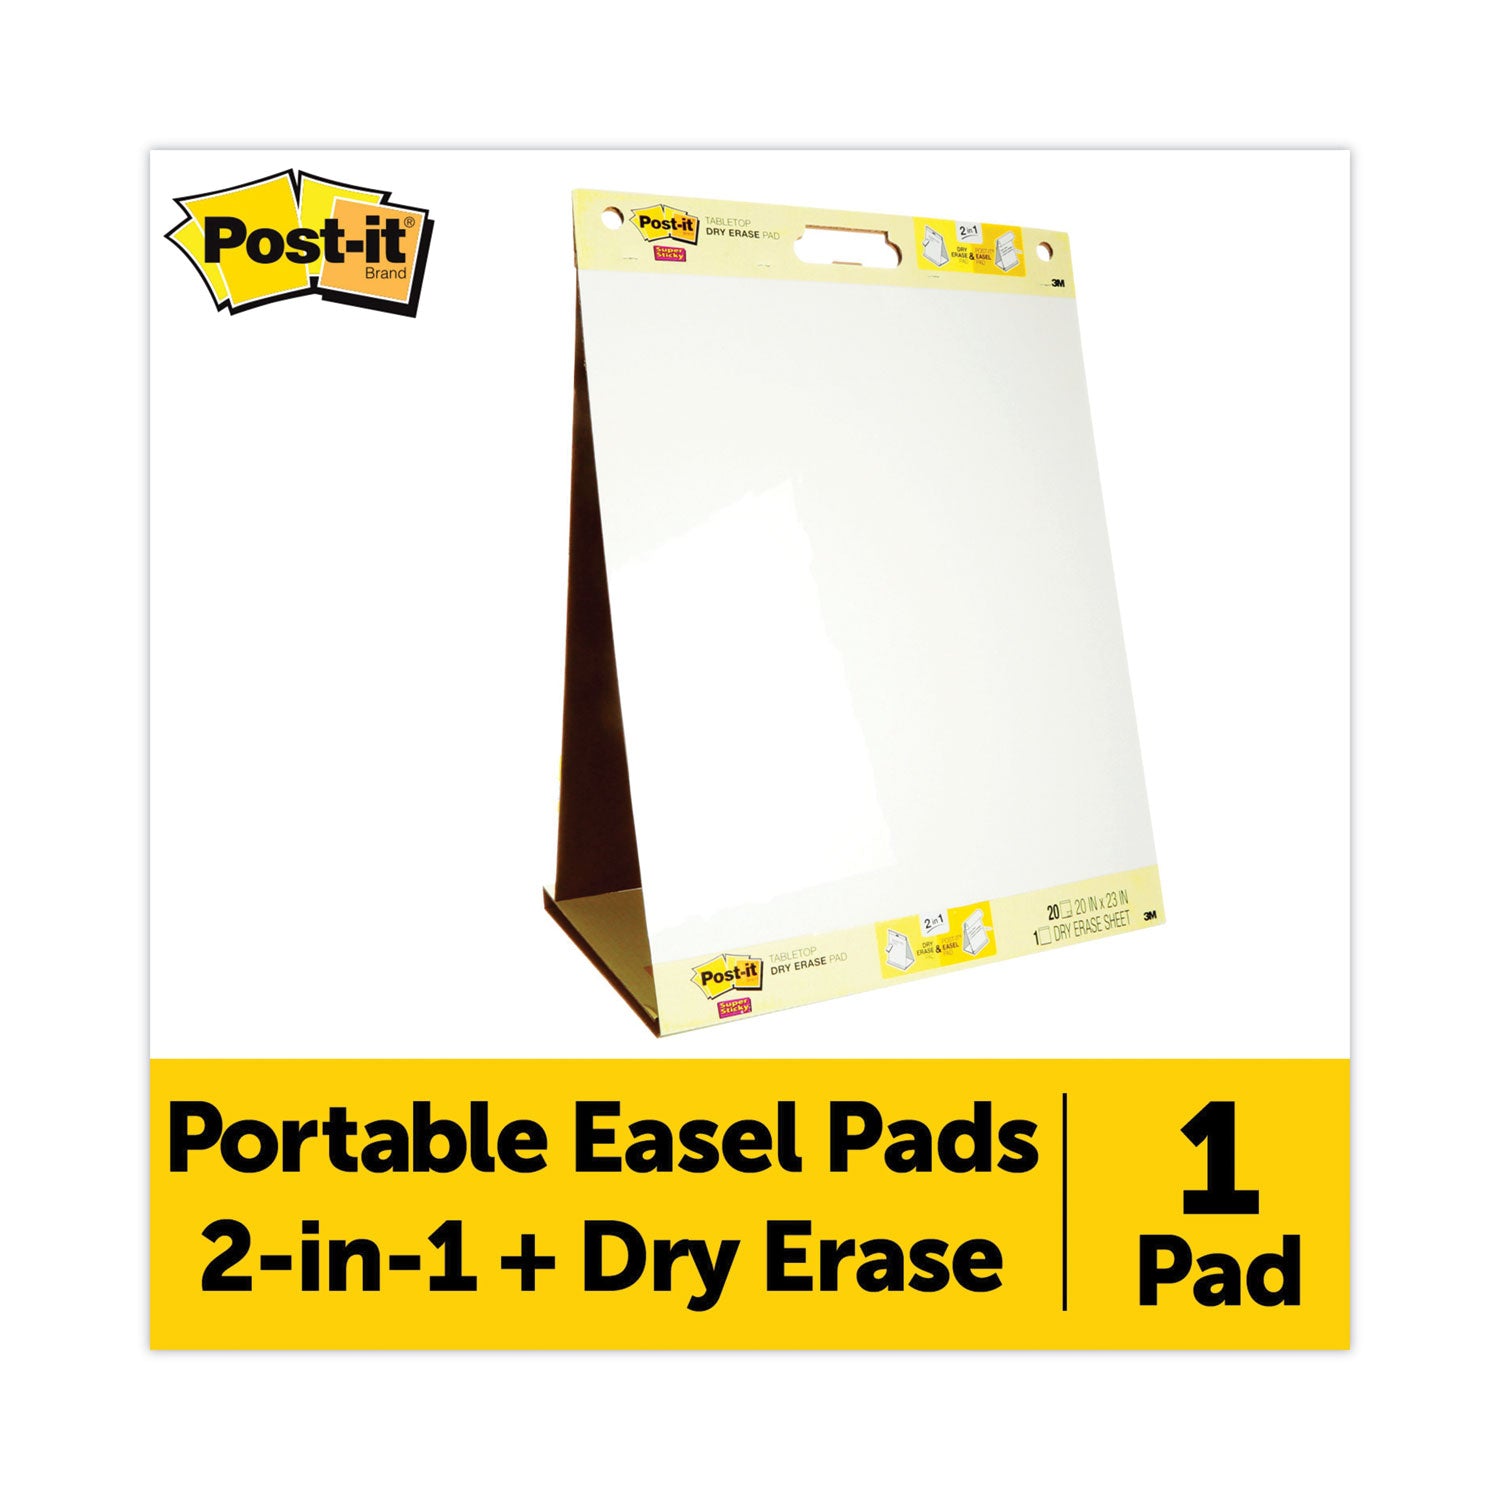 Pad Plus Tabletop Easel Pad with Self-Stick Sheets and Dry Erase Board, Unruled, 20 x 23, White, 20 Sheets - 